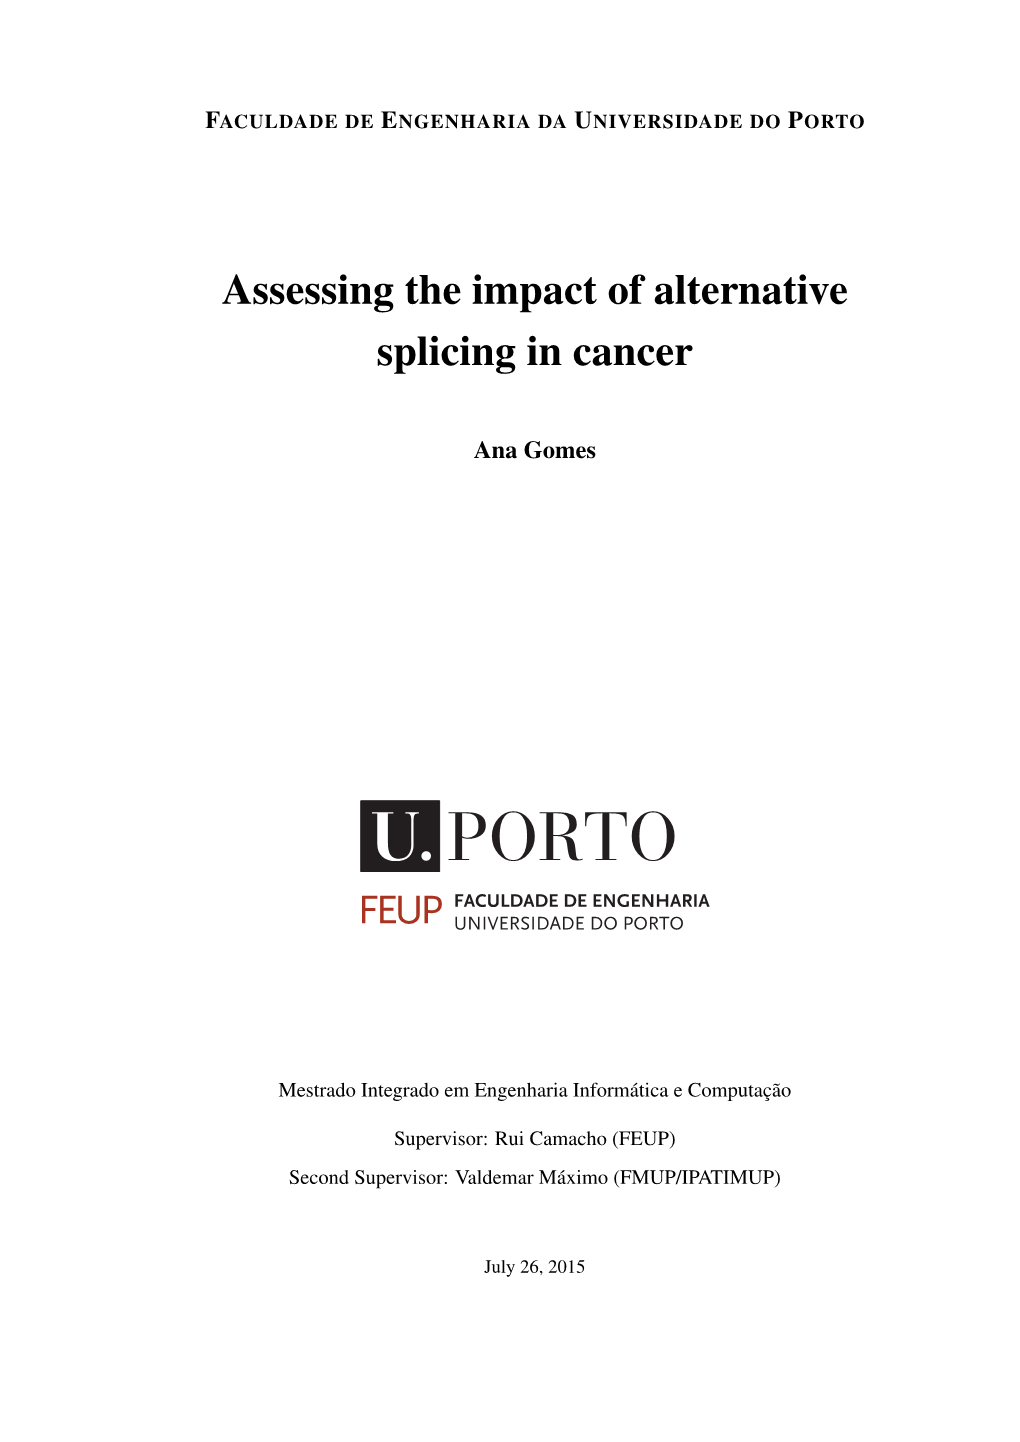 Assessing the Impact of Alternative Splicing in Cancer